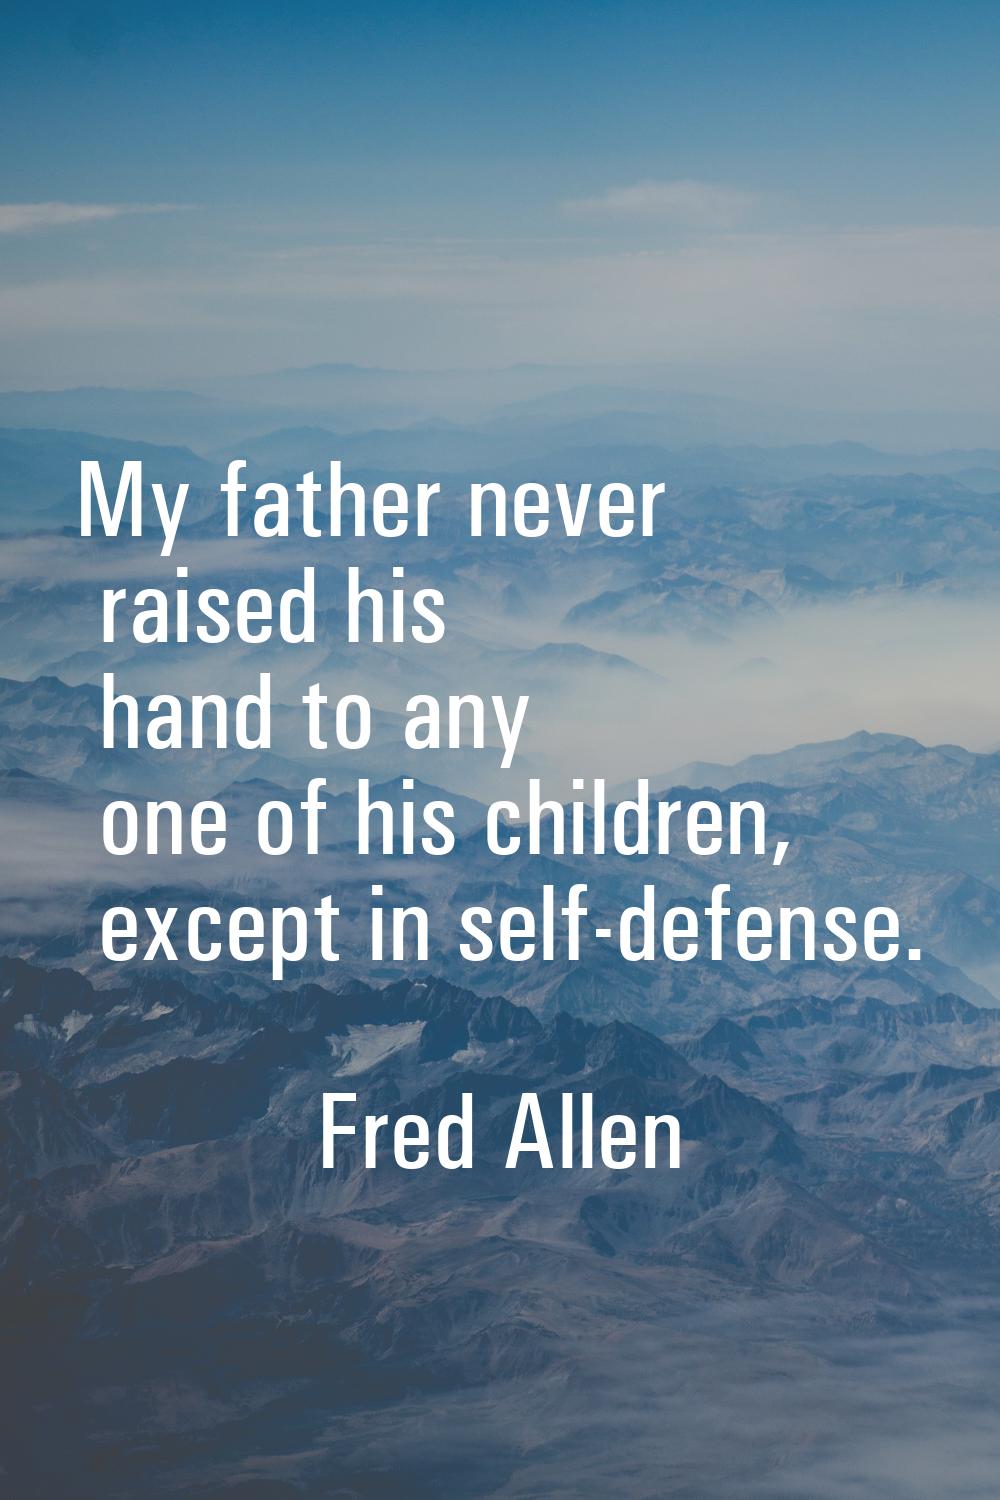 My father never raised his hand to any one of his children, except in self-defense.